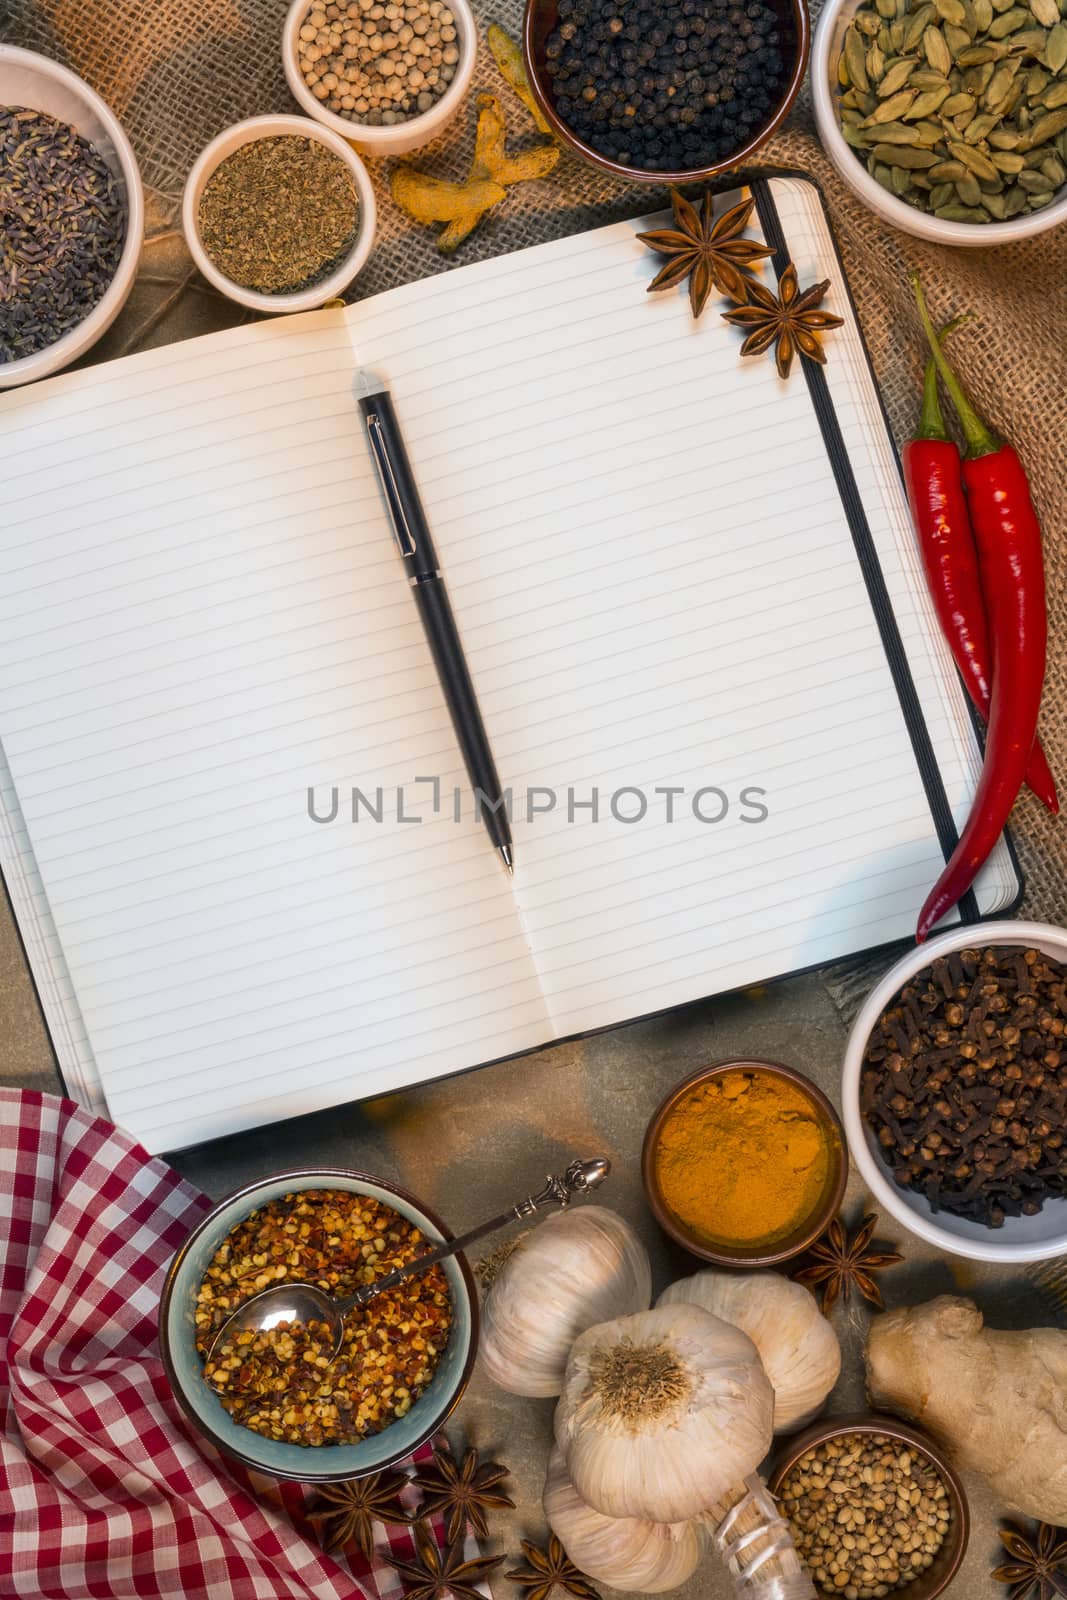 Selection of Cooking Spices with an Open Recipe Book - Blank Pages - Space for Text